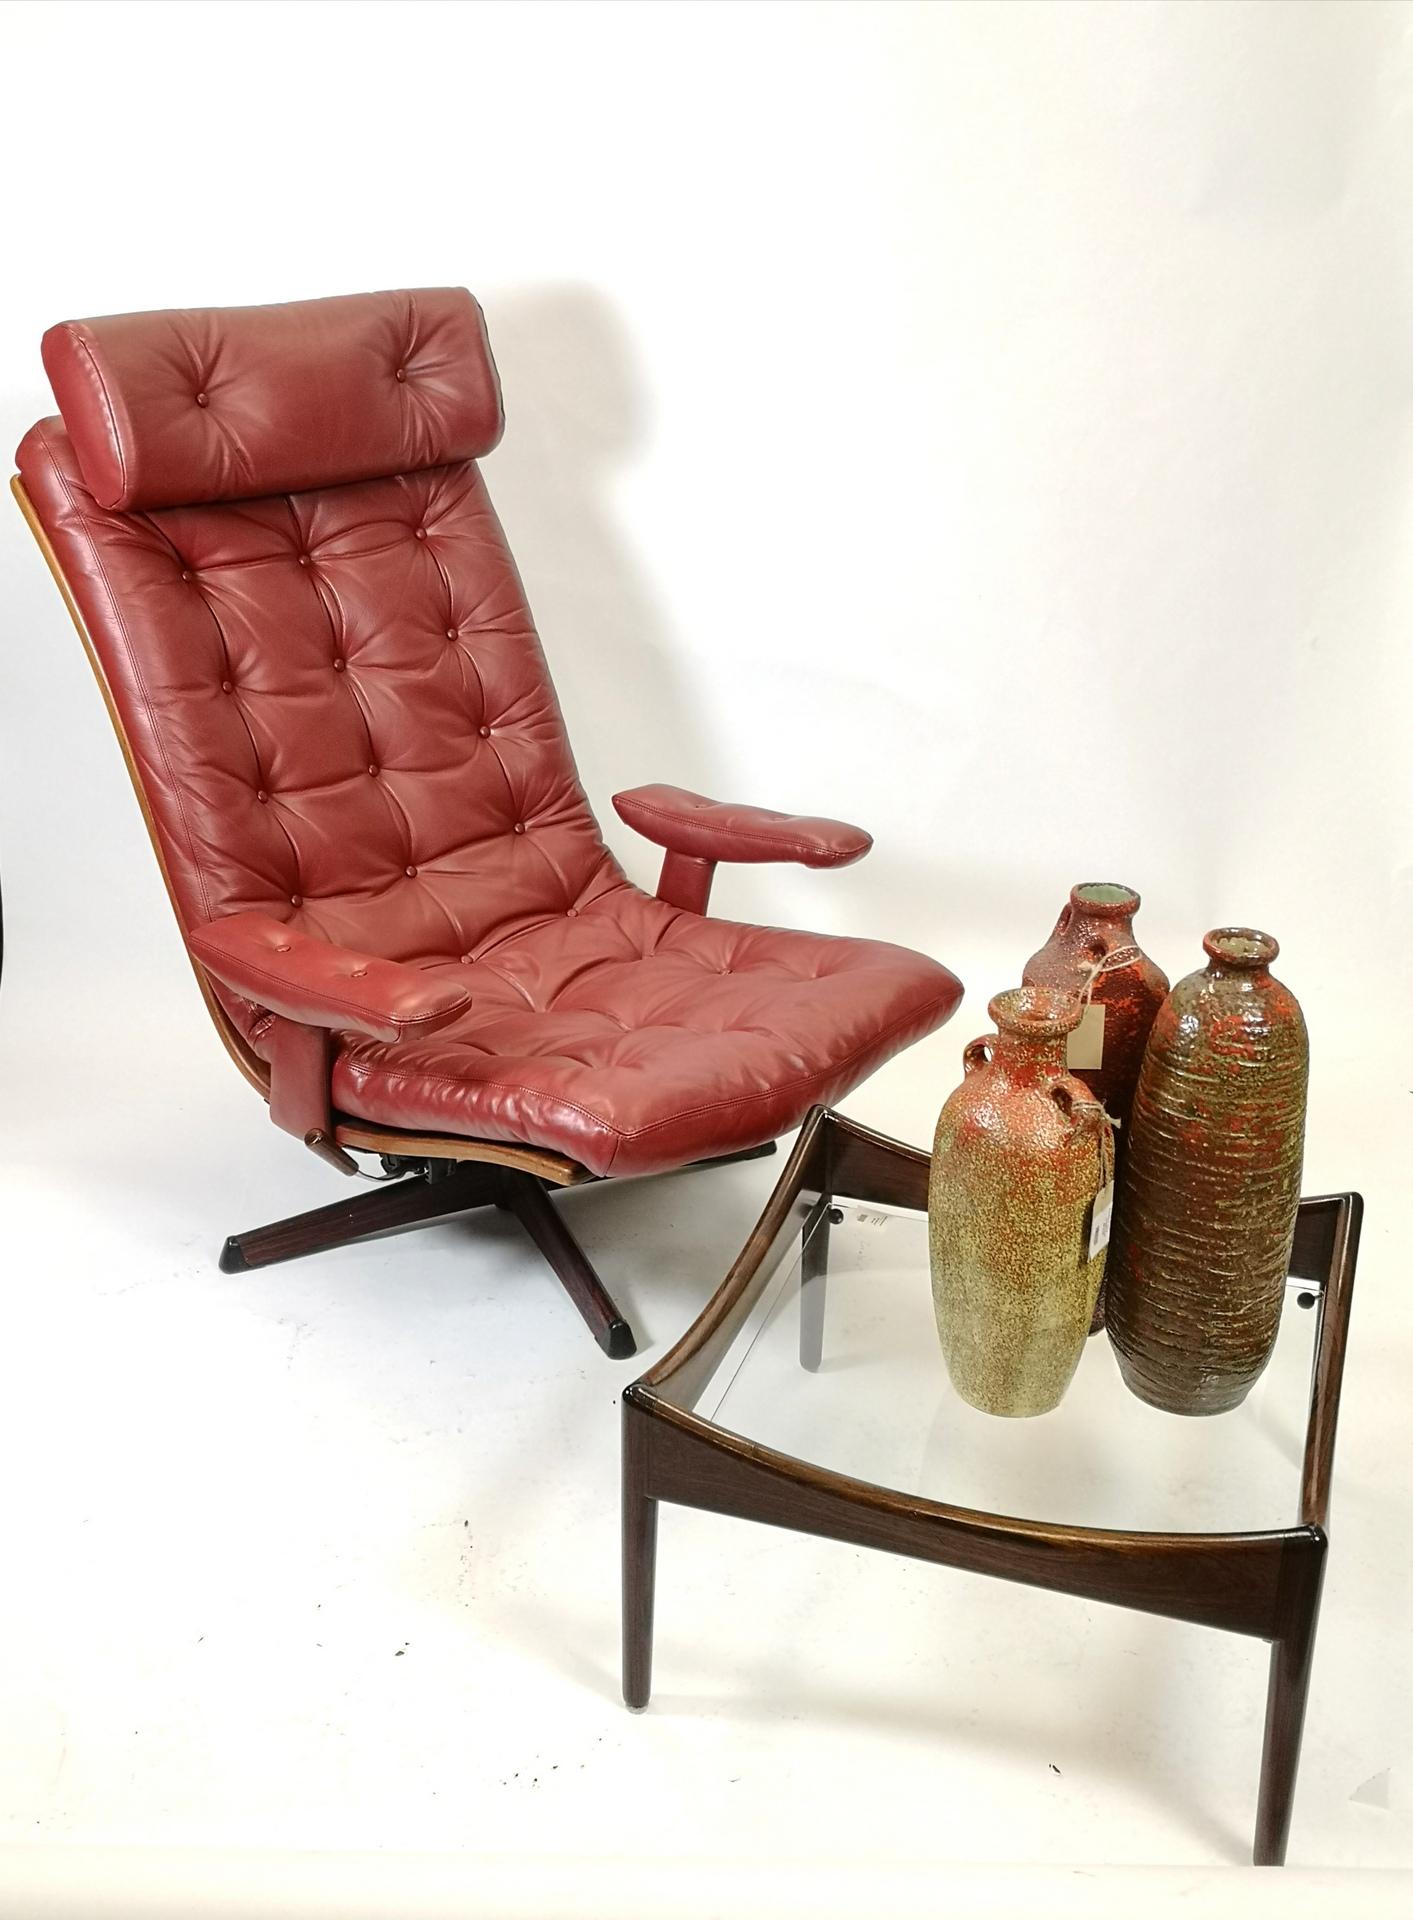 This cognac colored full leather lounge or easy chairs swivels and it's adjustable. It was designed by Göte Design in Sweden, Nässjö, 1960s.
It features a massive palisander adjusting handle and a palisander print on the base. It features the